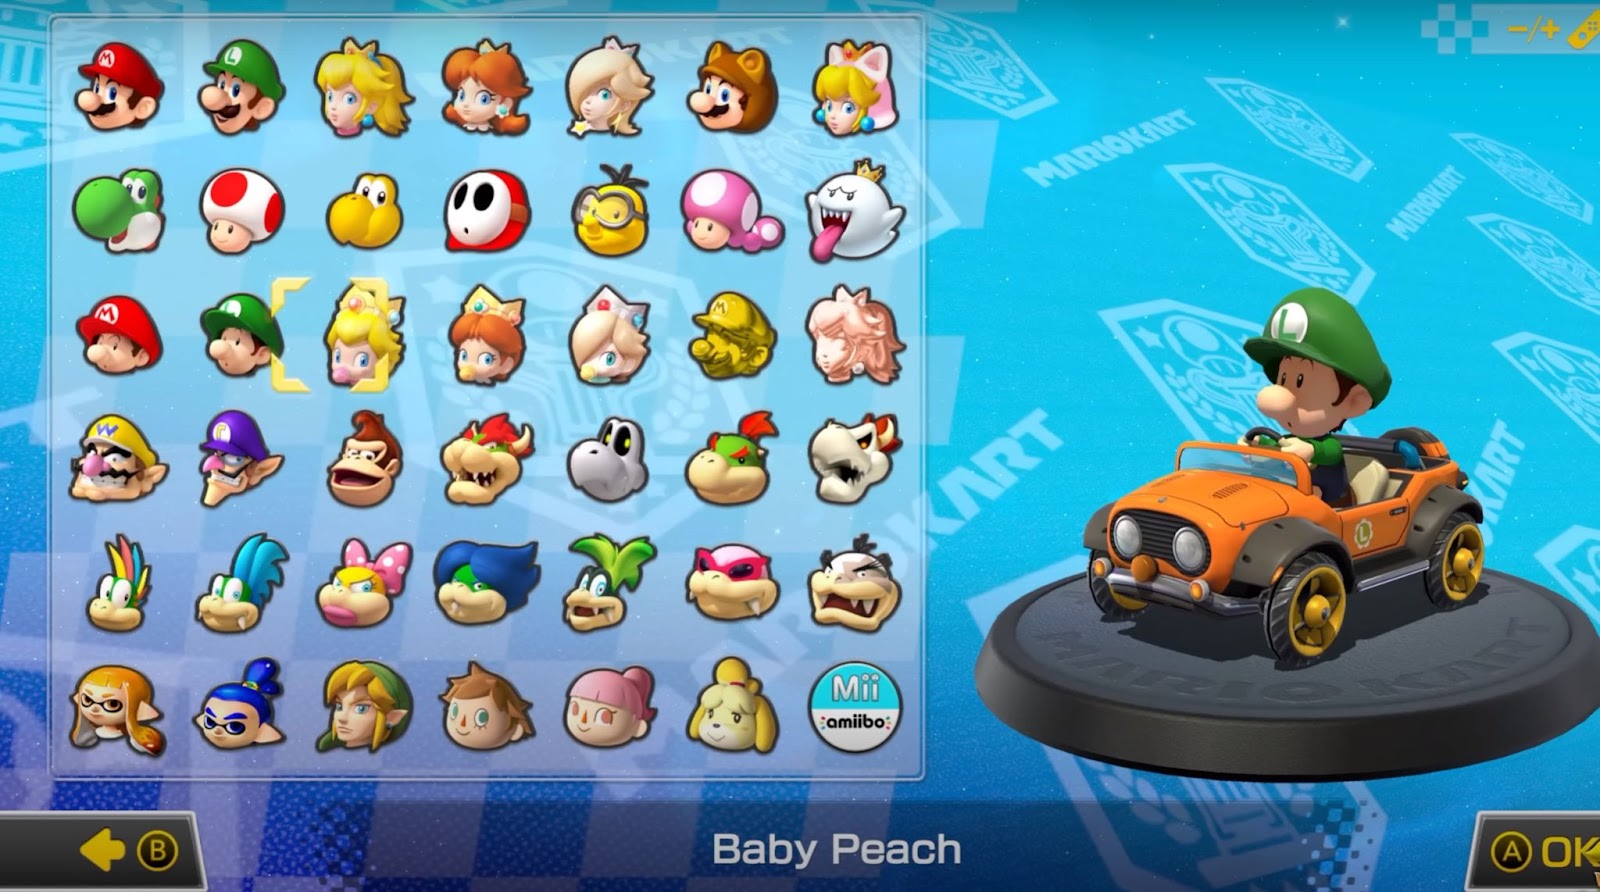 The Argument For Mario Kart 8 Coming To The 3DS